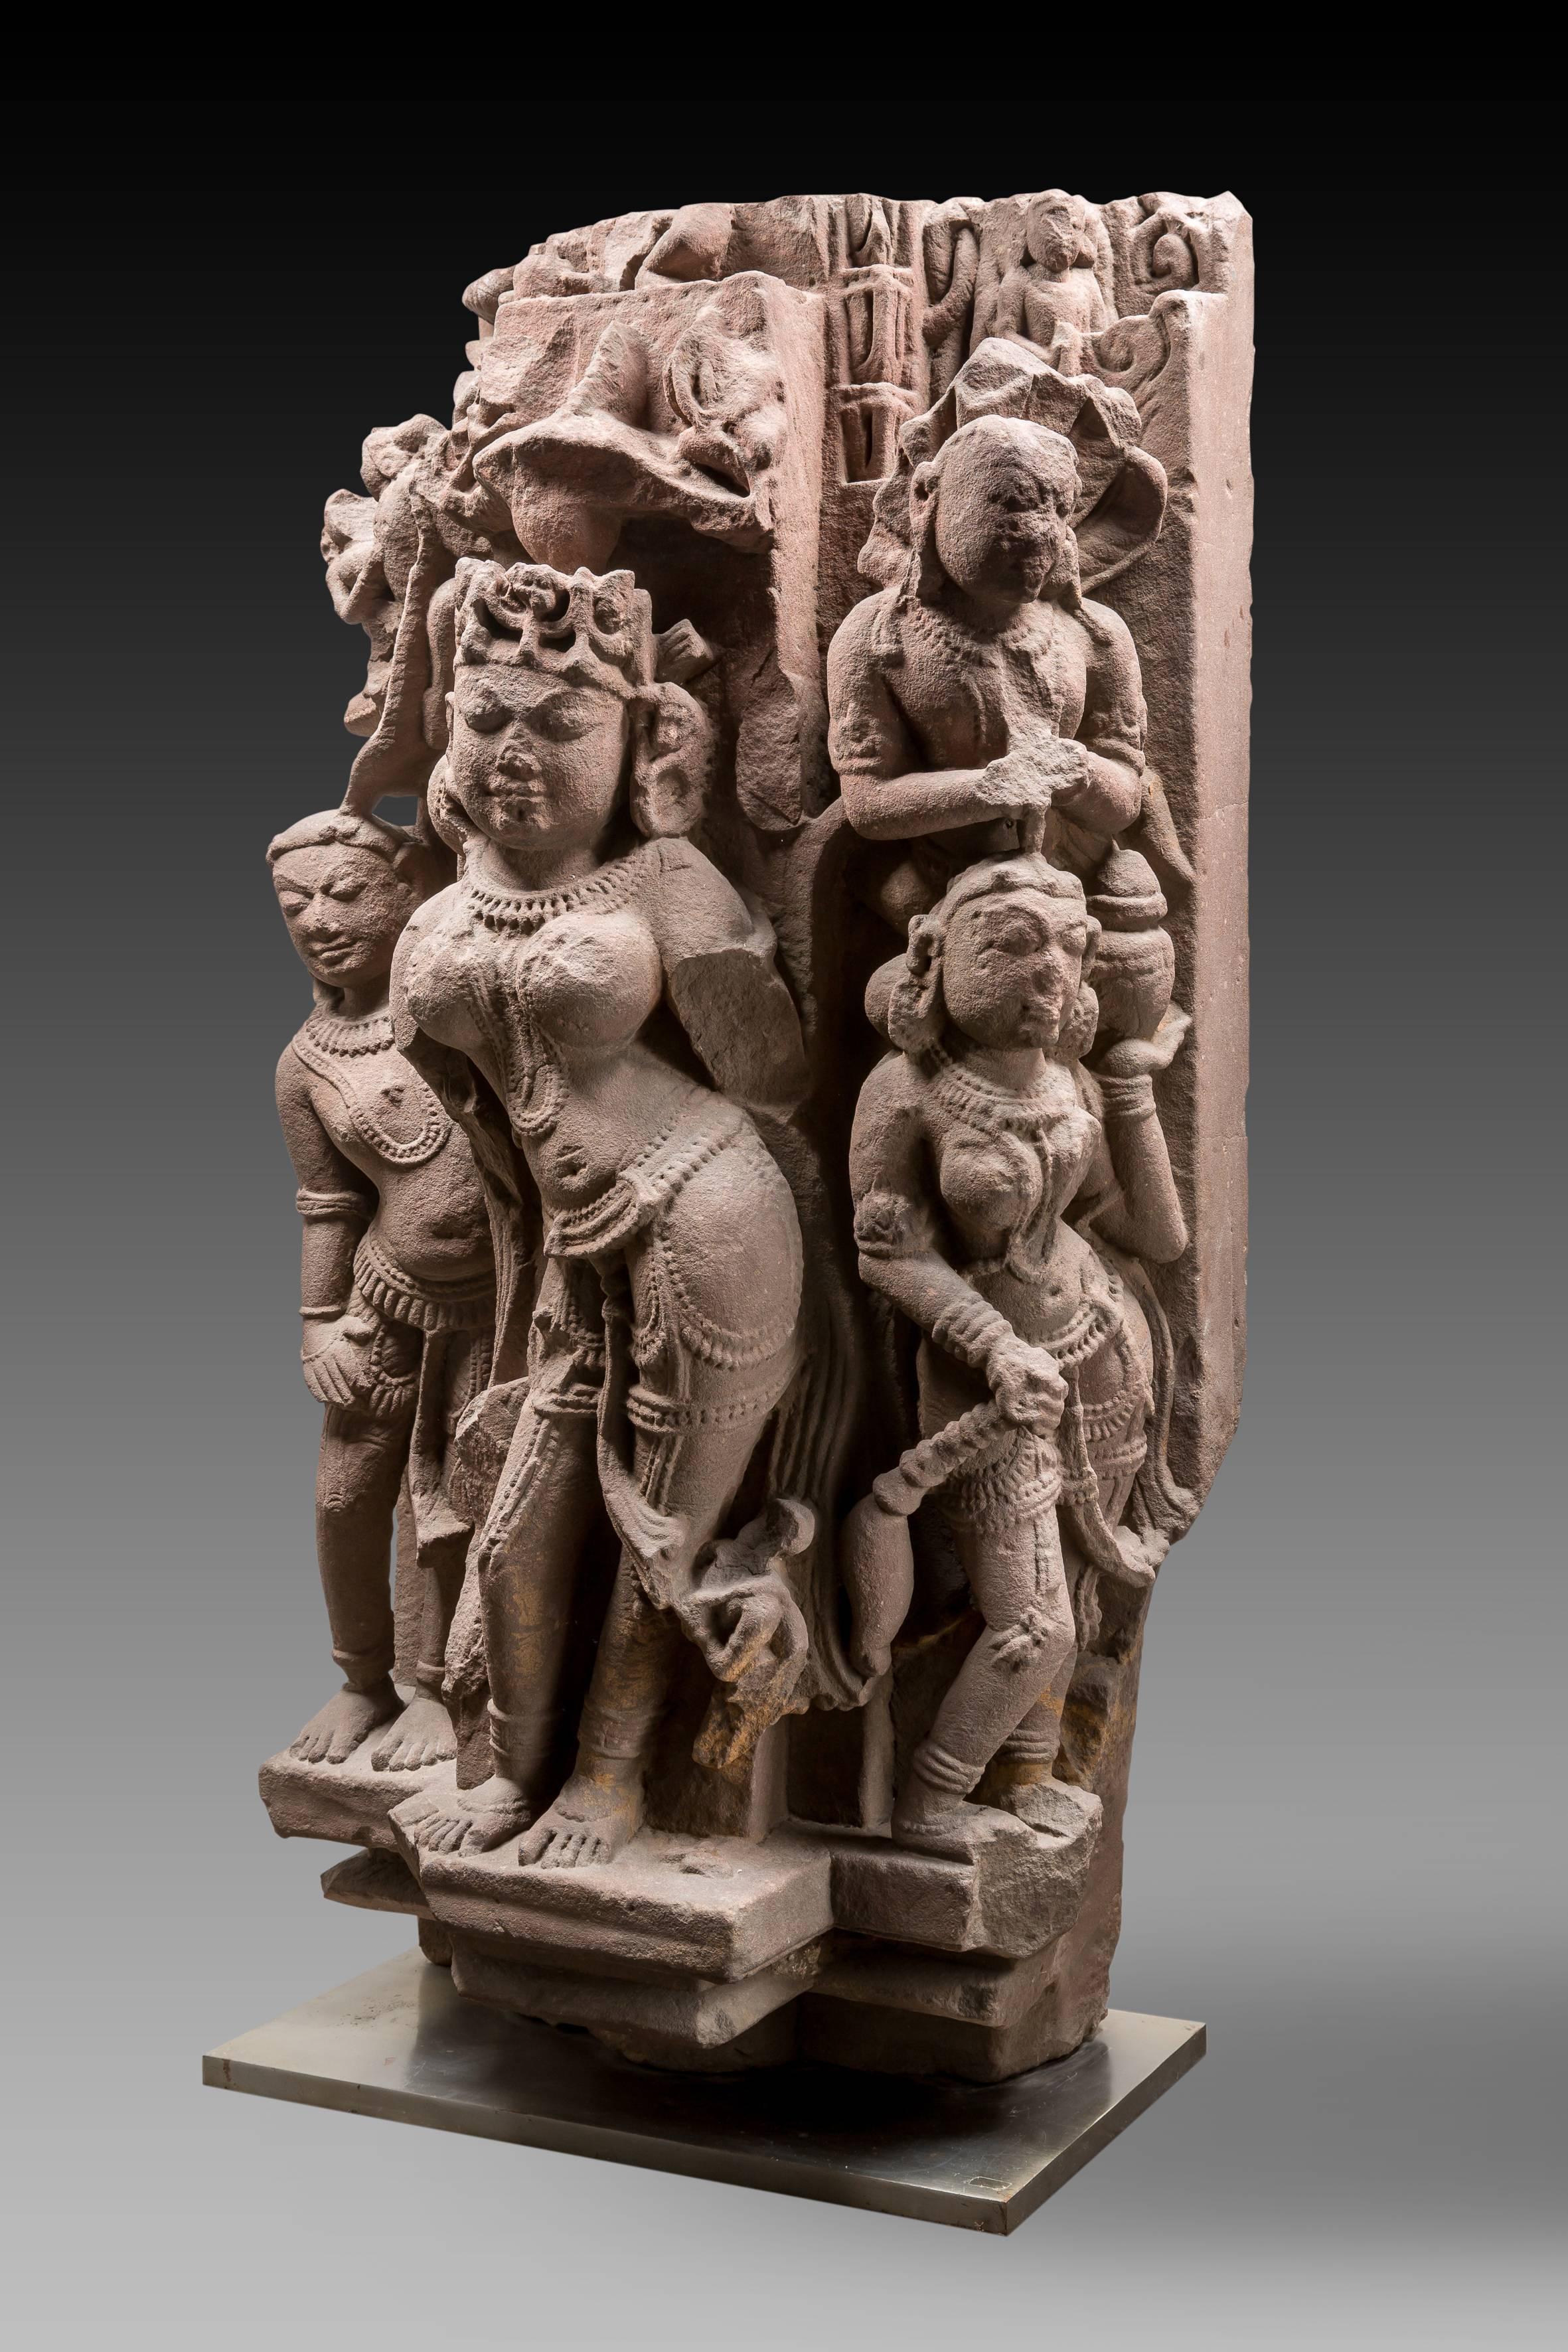 The standing female Devi, part of an important architectural relief, is standing in tribangha under a parasol which indicates her status. She is crowned and accompanied by two main attendants, the one on her left is holding a fly chaser and is